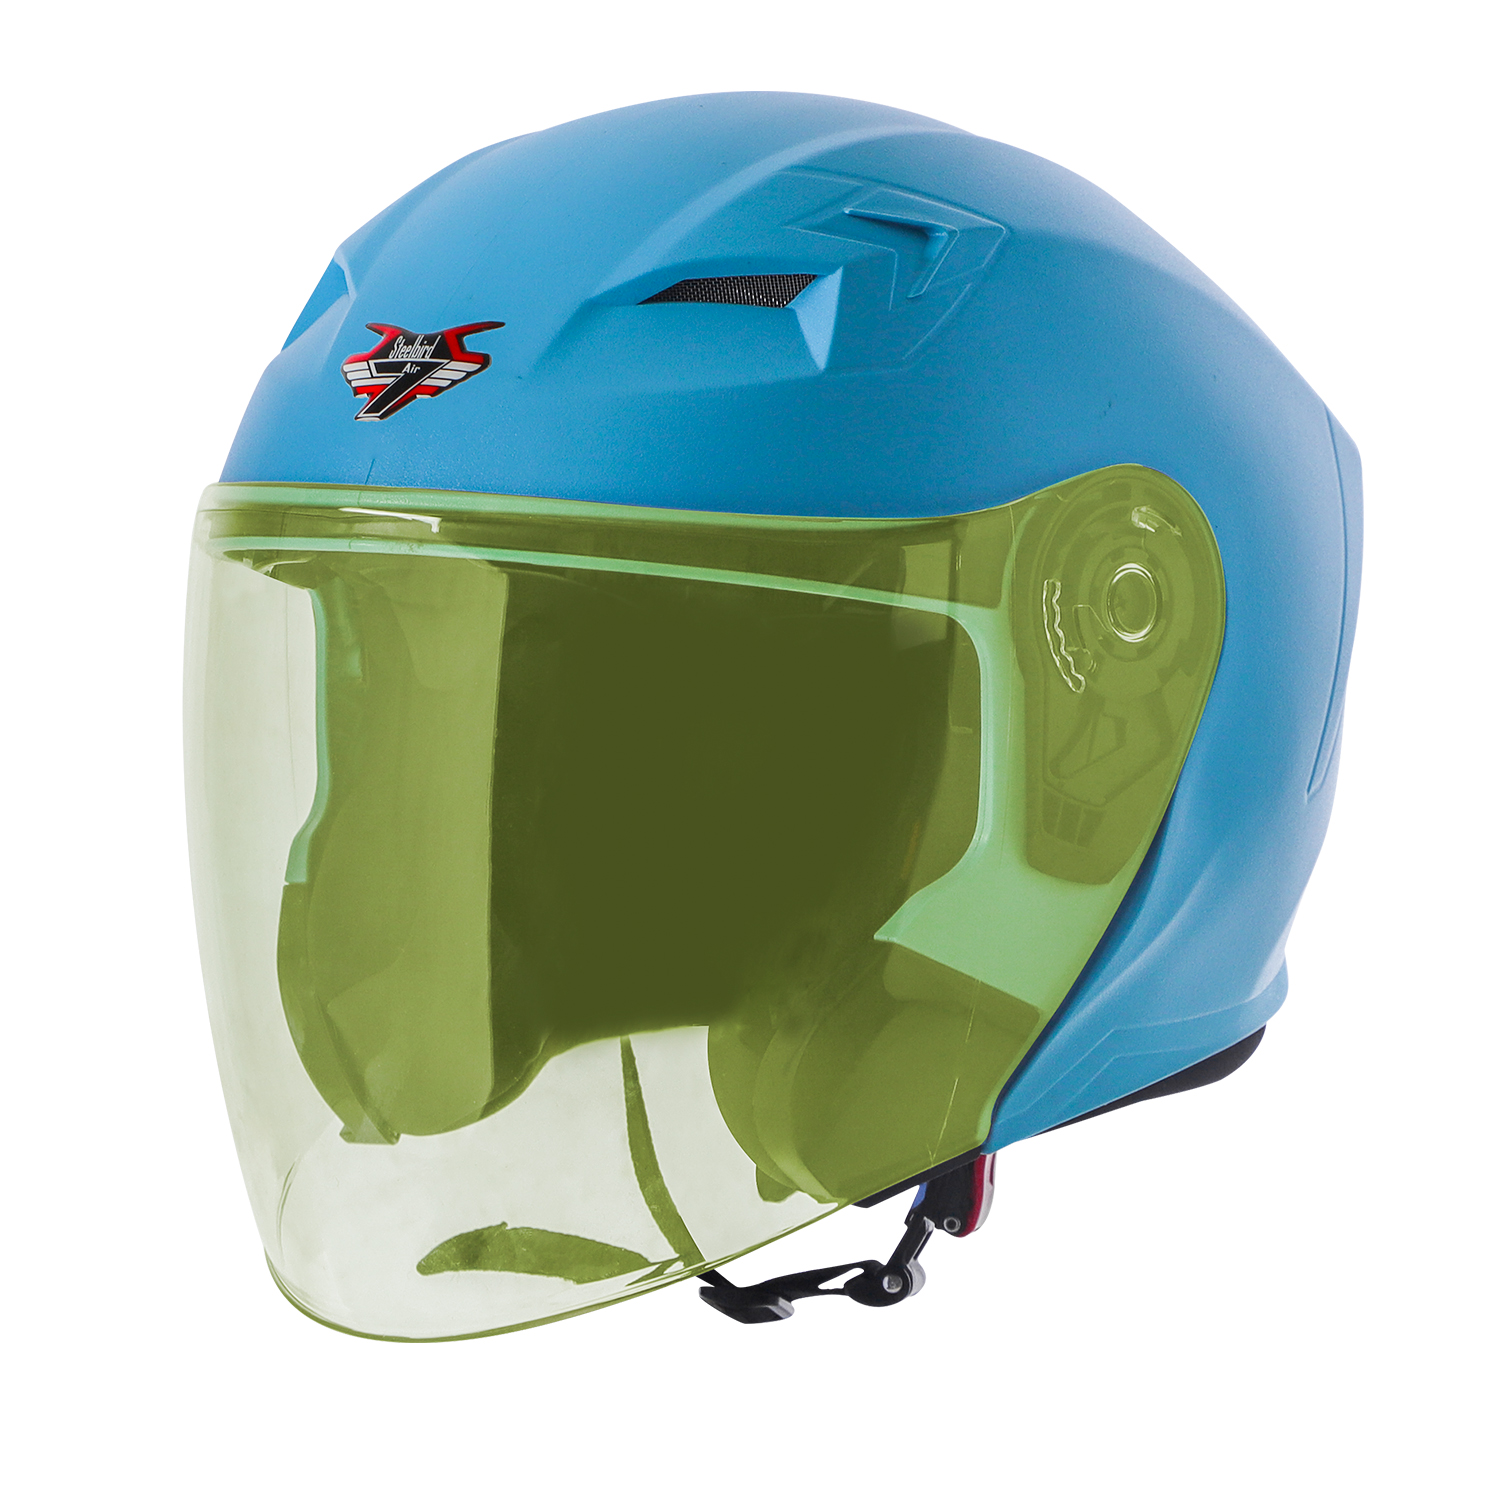 Steelbird SBA-17 7Wings ISI Certified Open Face Helmet for Men and Women (Dashing Jazz Blue with Tinted Yellow Visor)